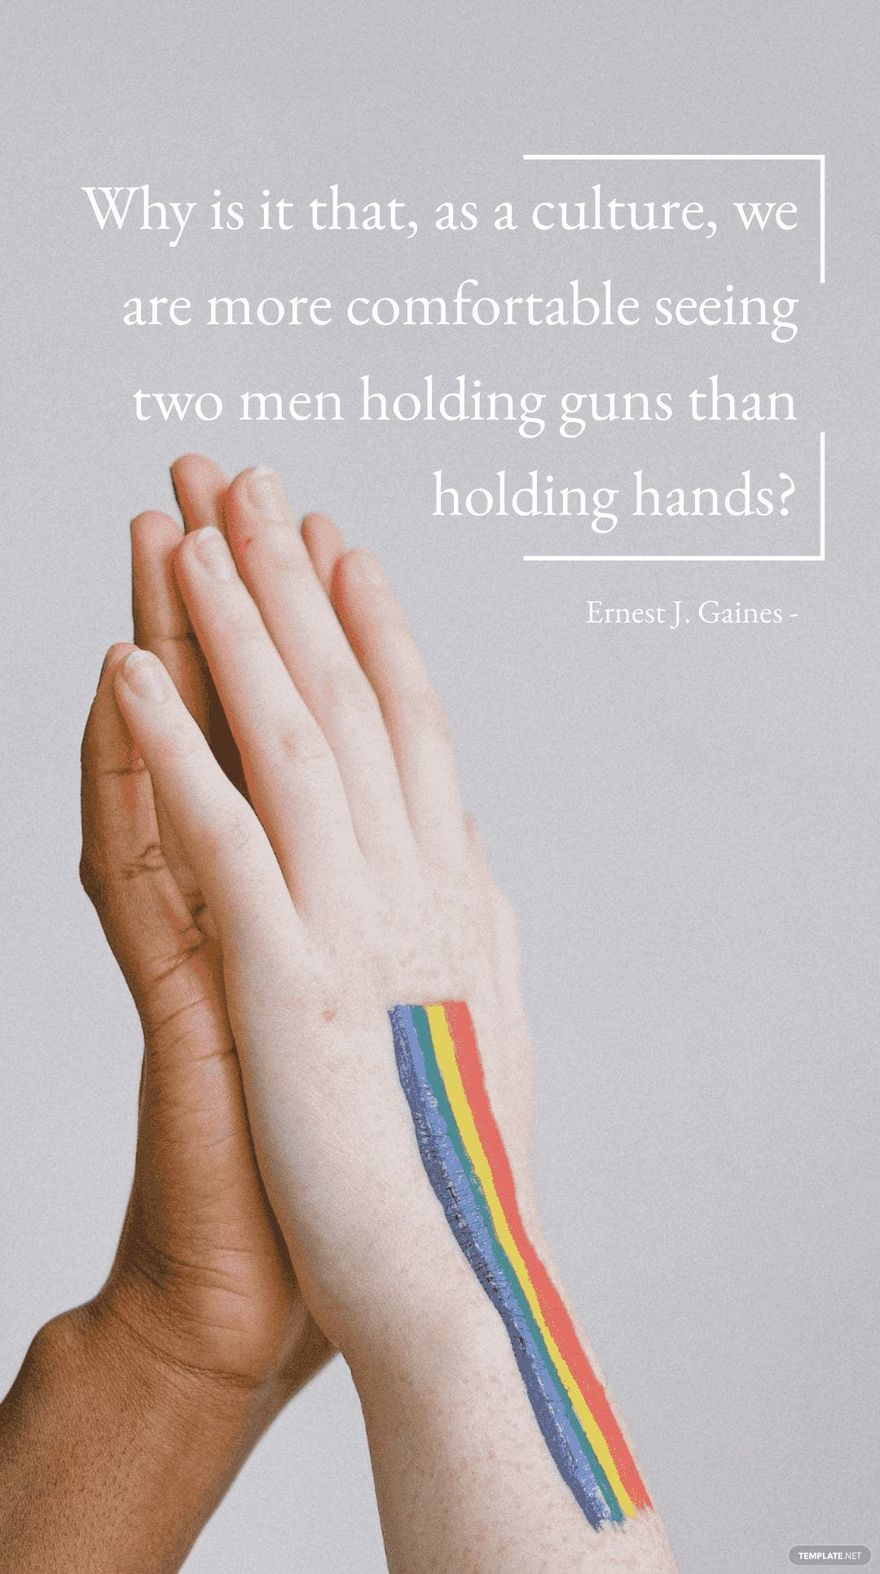 Ernest J. Gaines - Why is it that, as a culture, we are more comfortable seeing two men holding guns than holding hands?